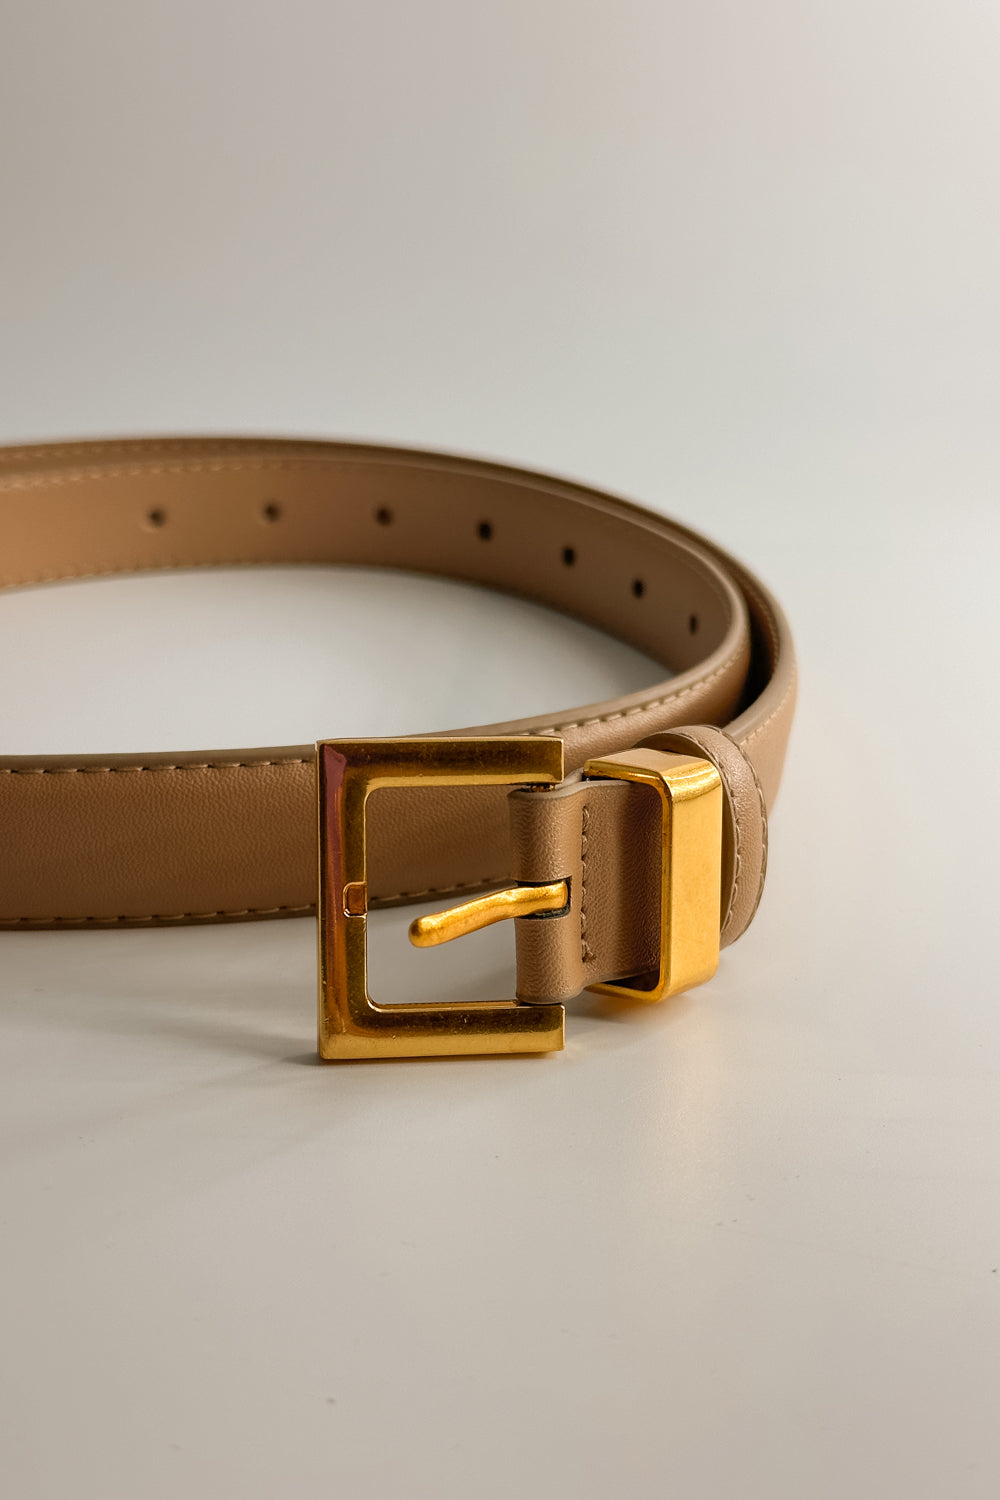 Front close up view of the Iris Taupe Slim Square Buckle Belt which features taupe Leather Fabric and Gold Square Adjustable Buckle